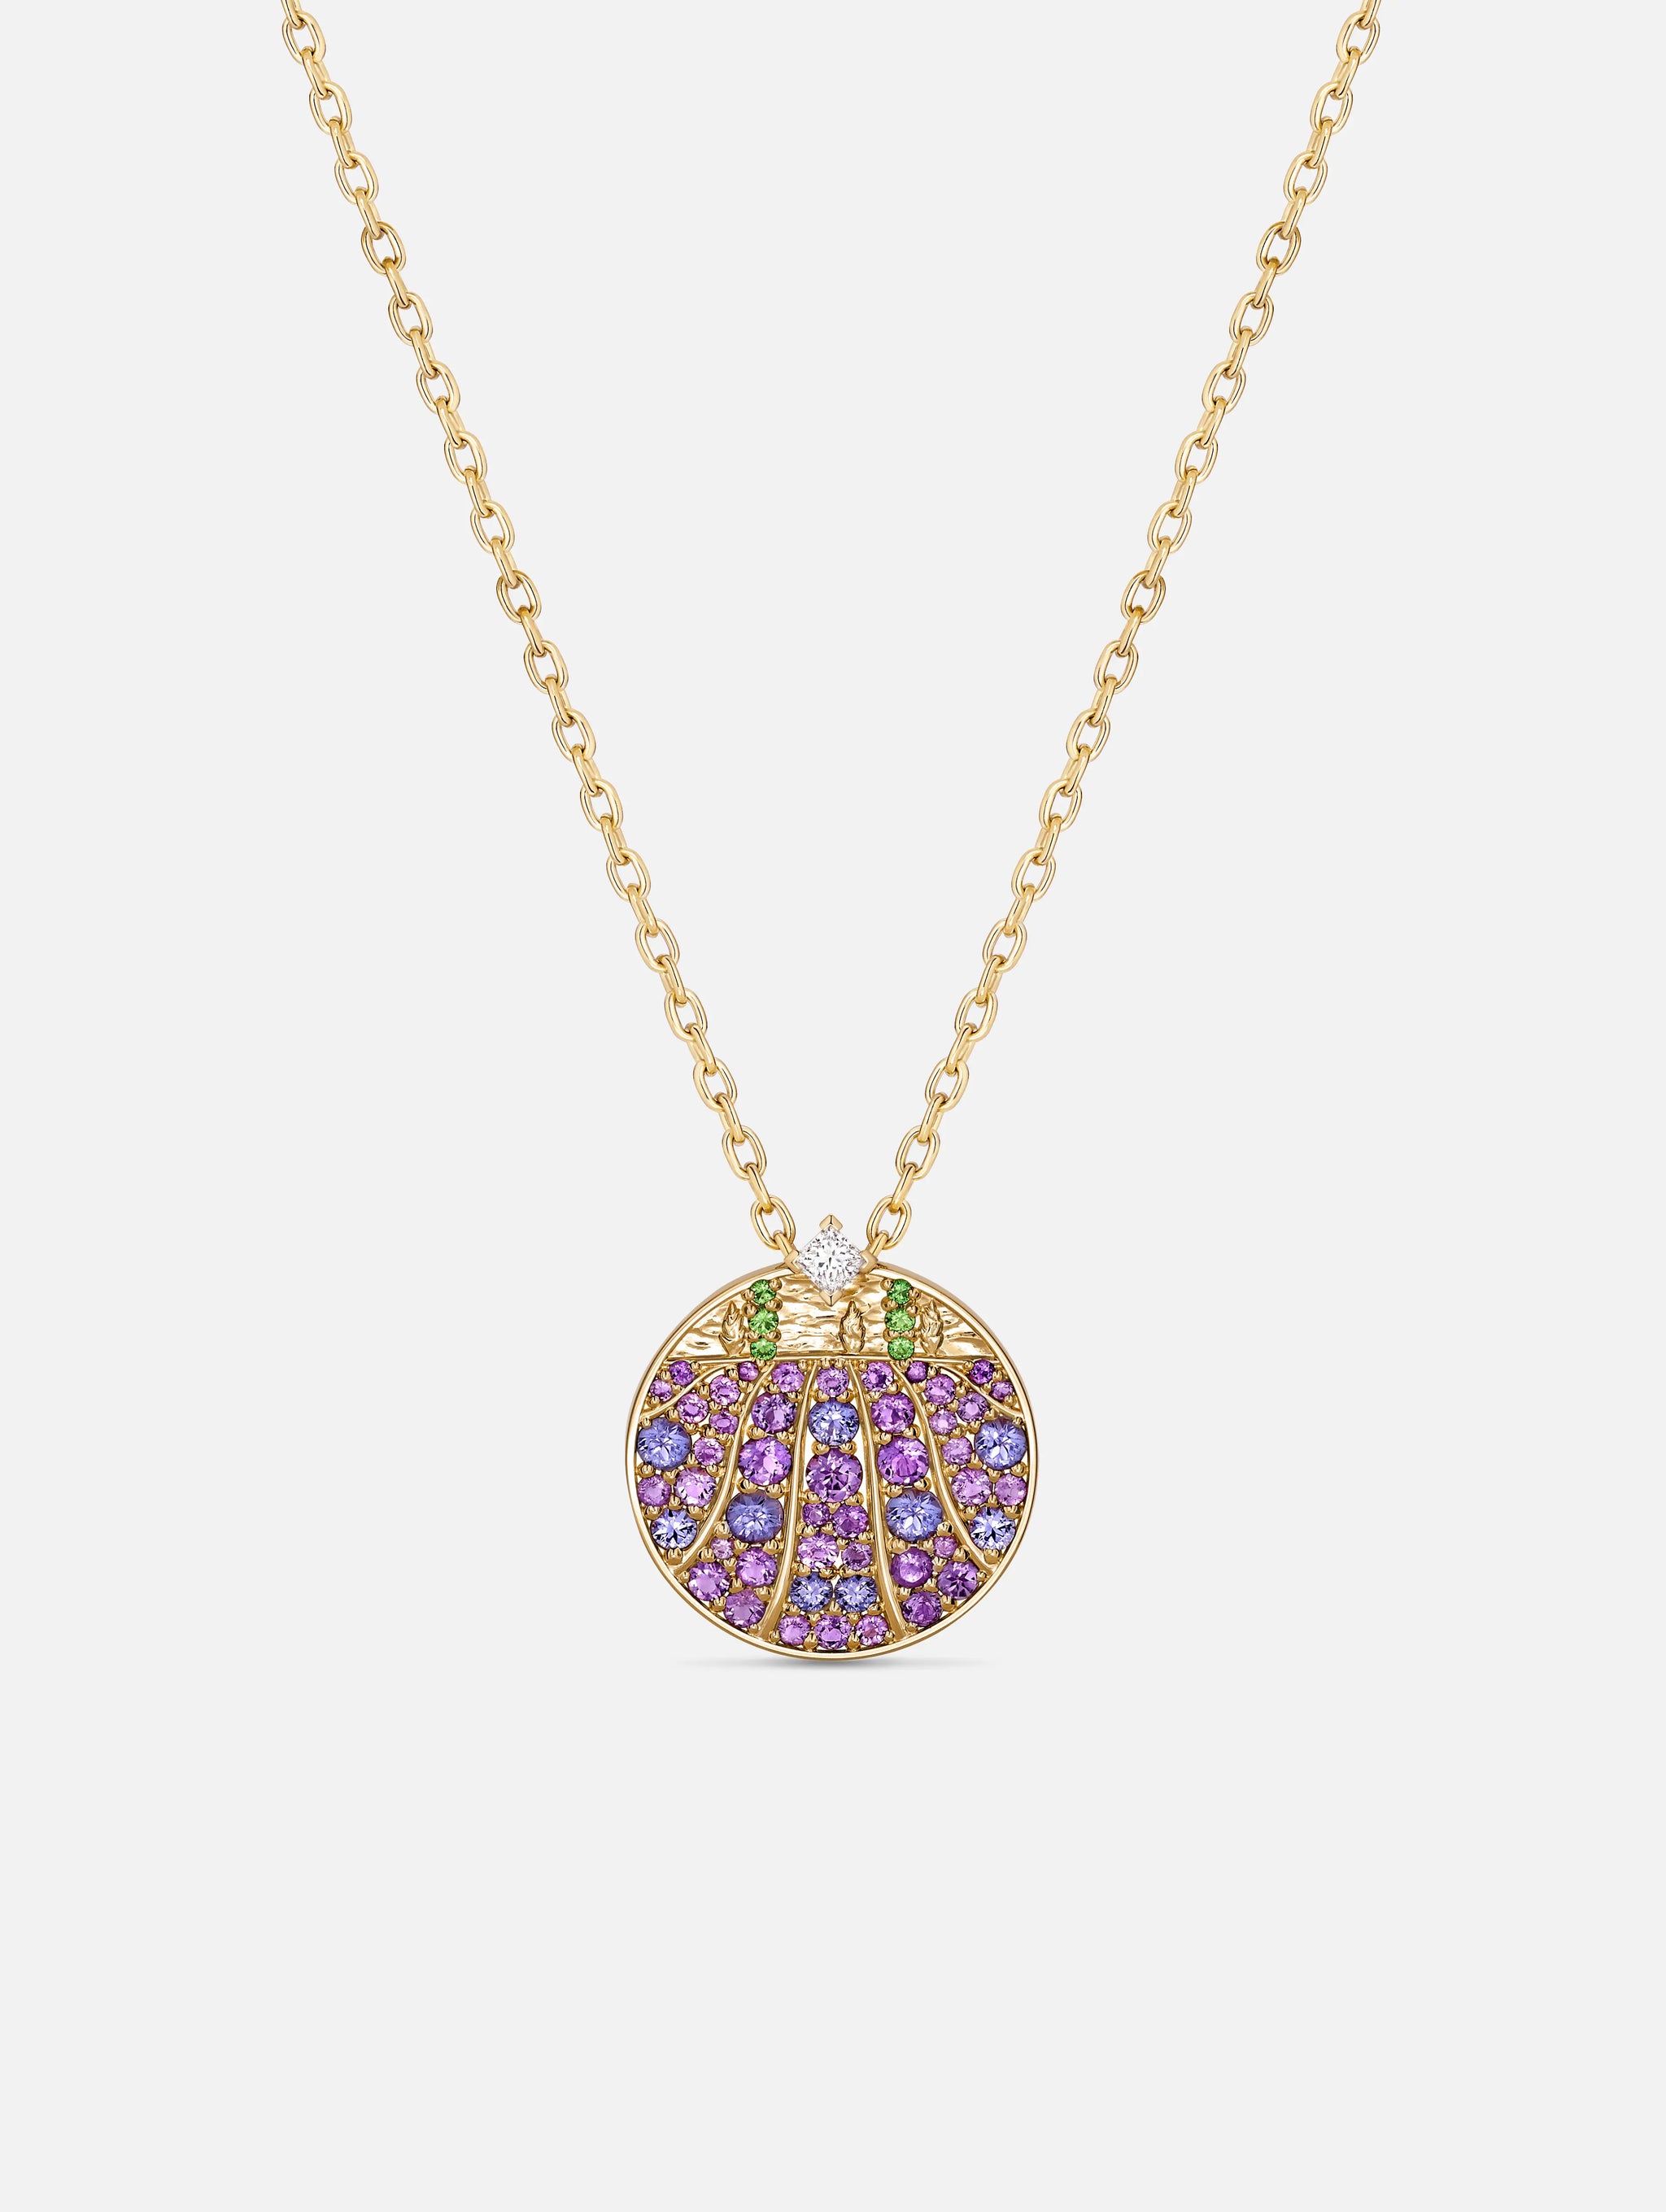 Lavender Fields Medallion in Yellow Gold - 1 - Nouvel Heritage